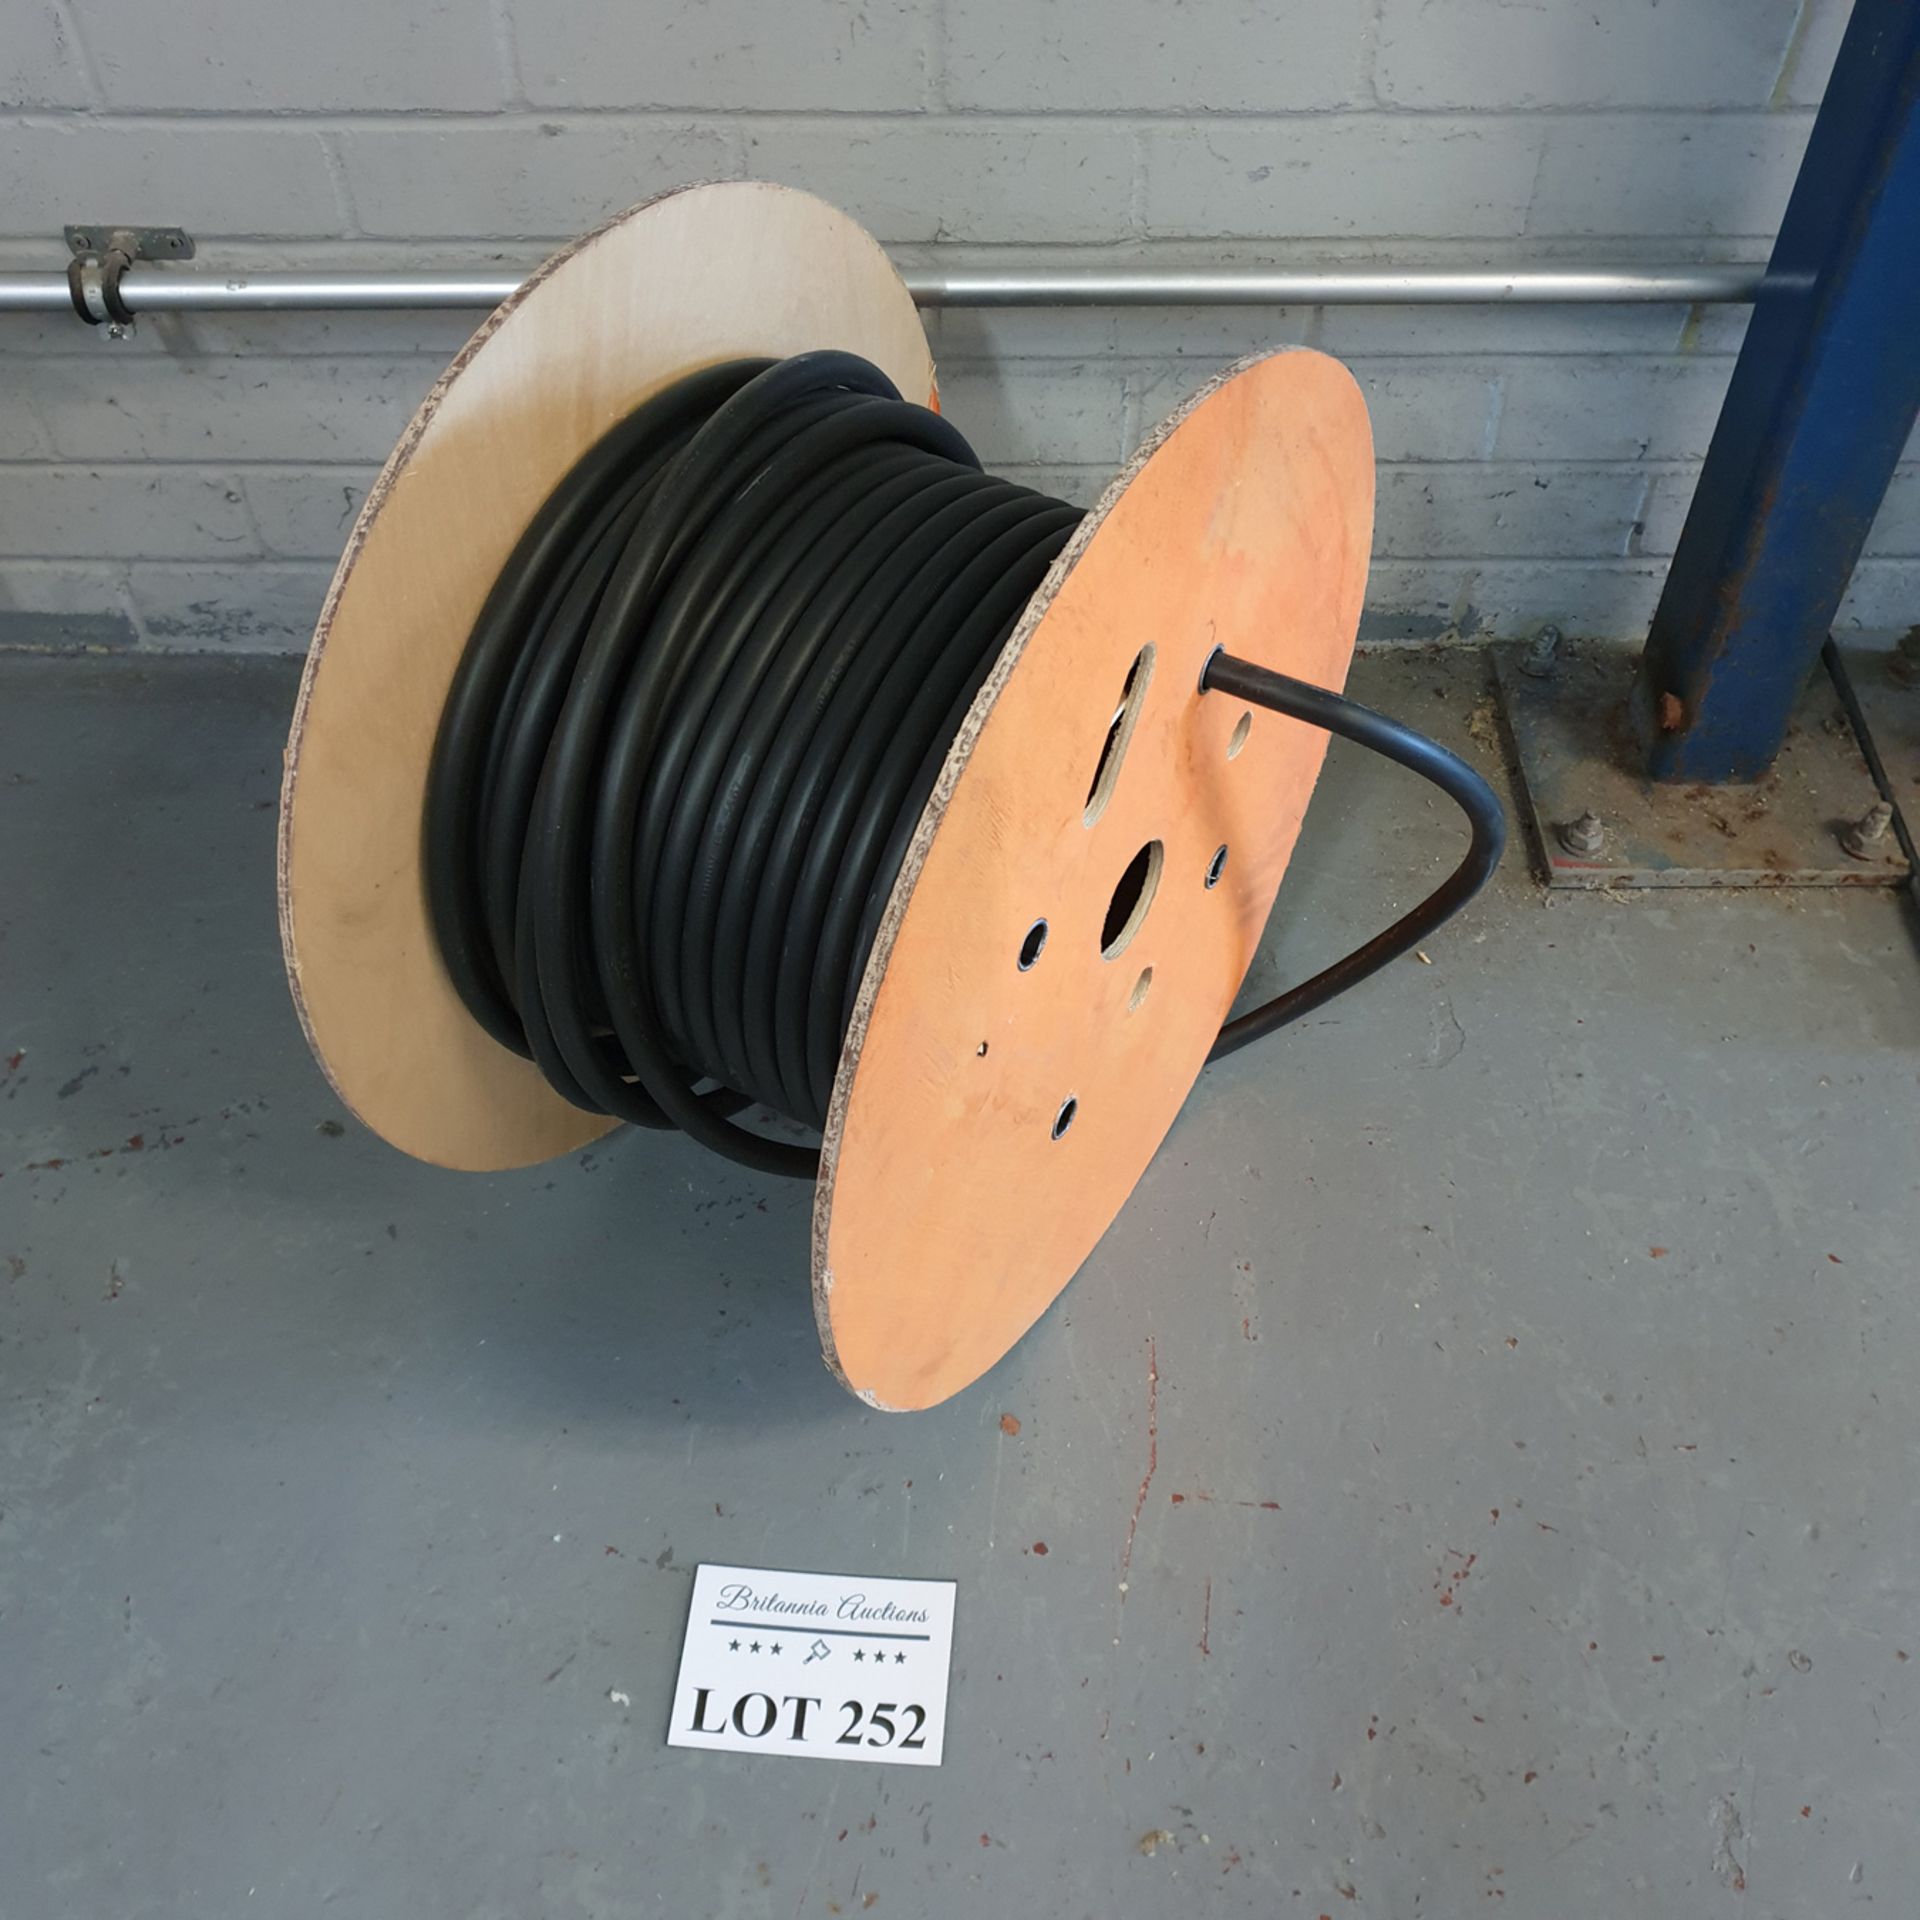 Reel of Heavy Duty 3 Core Cable.